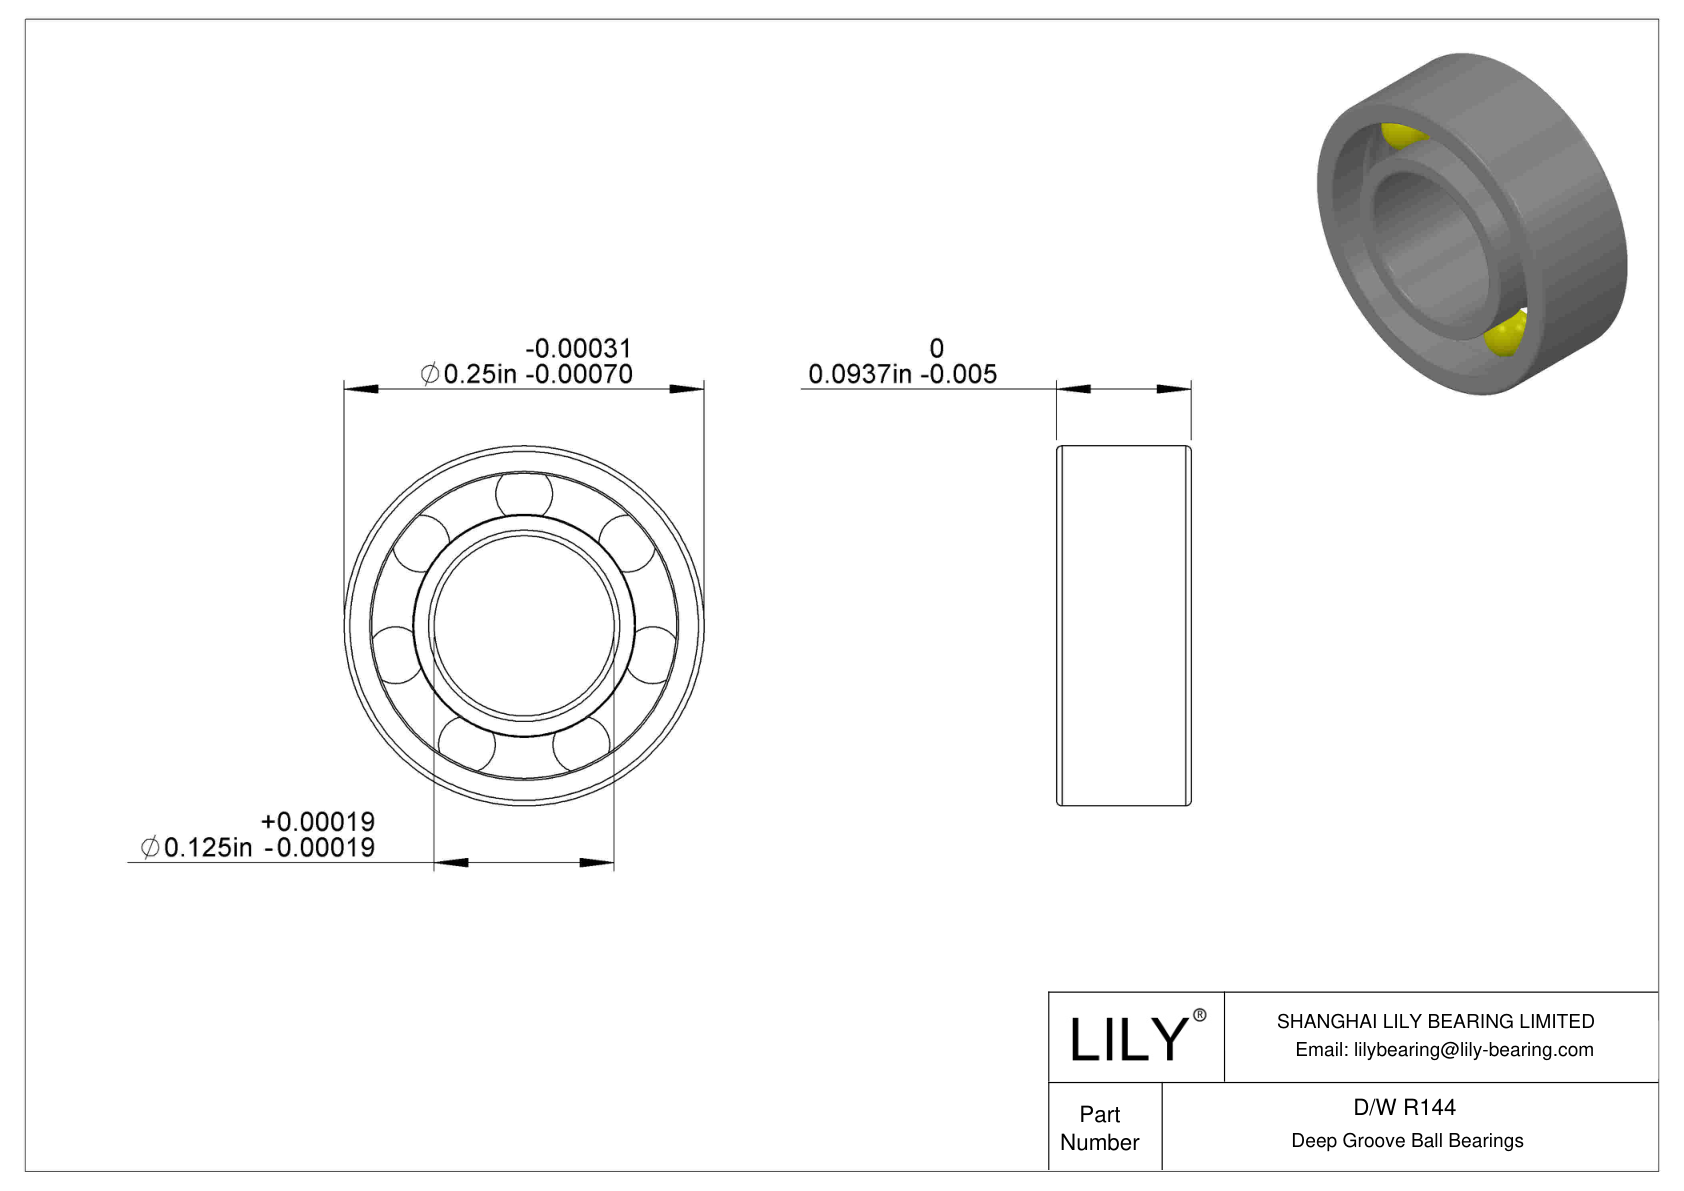 D/W R144 Stainless Steel Deep Groove Ball Bearings cad drawing